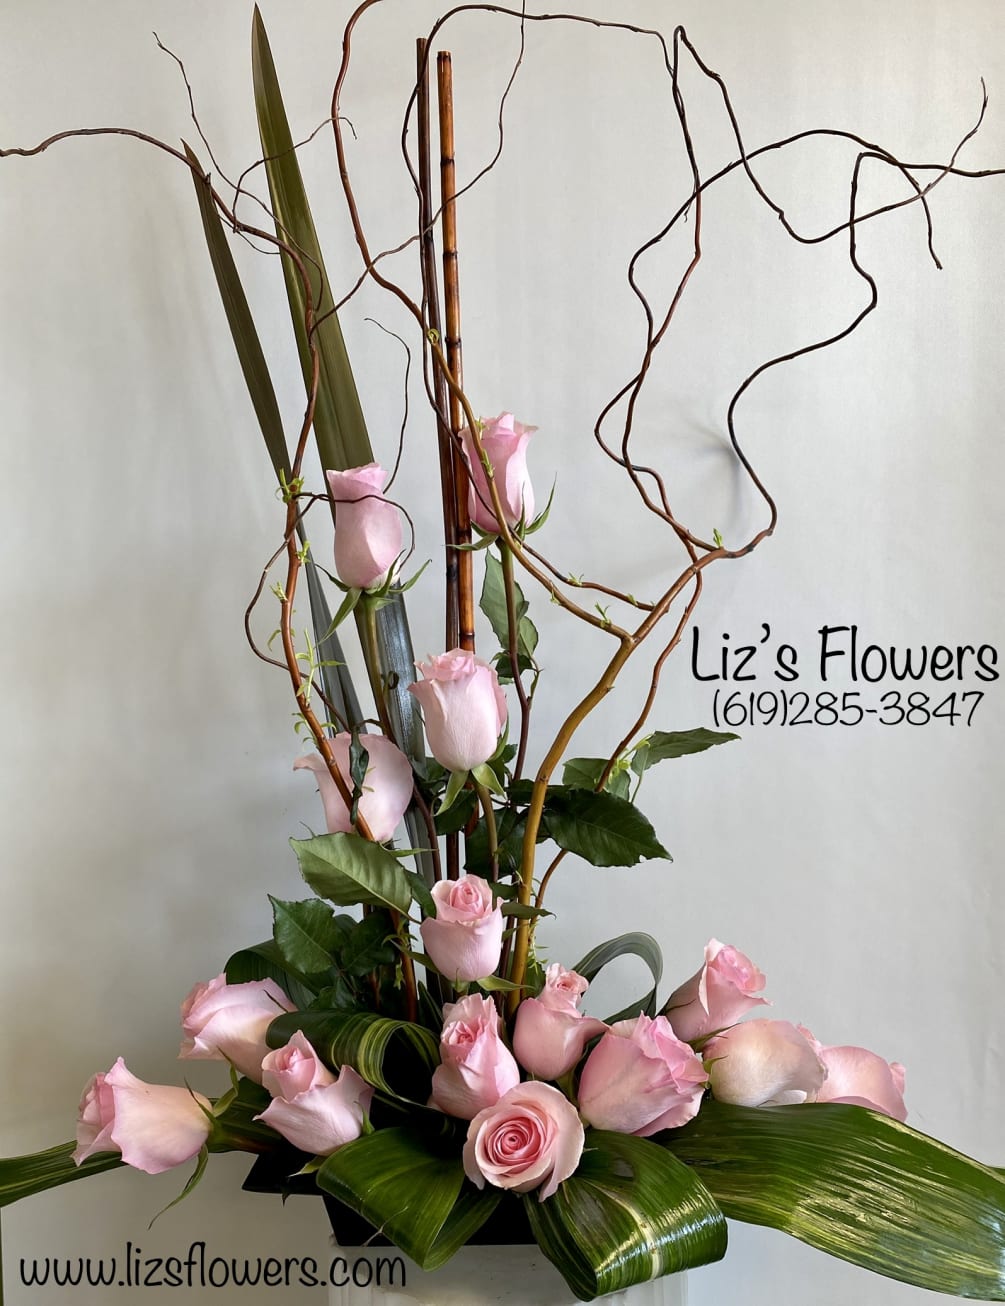 This artistic high-style design of classic Pink roses blends contemporary design with